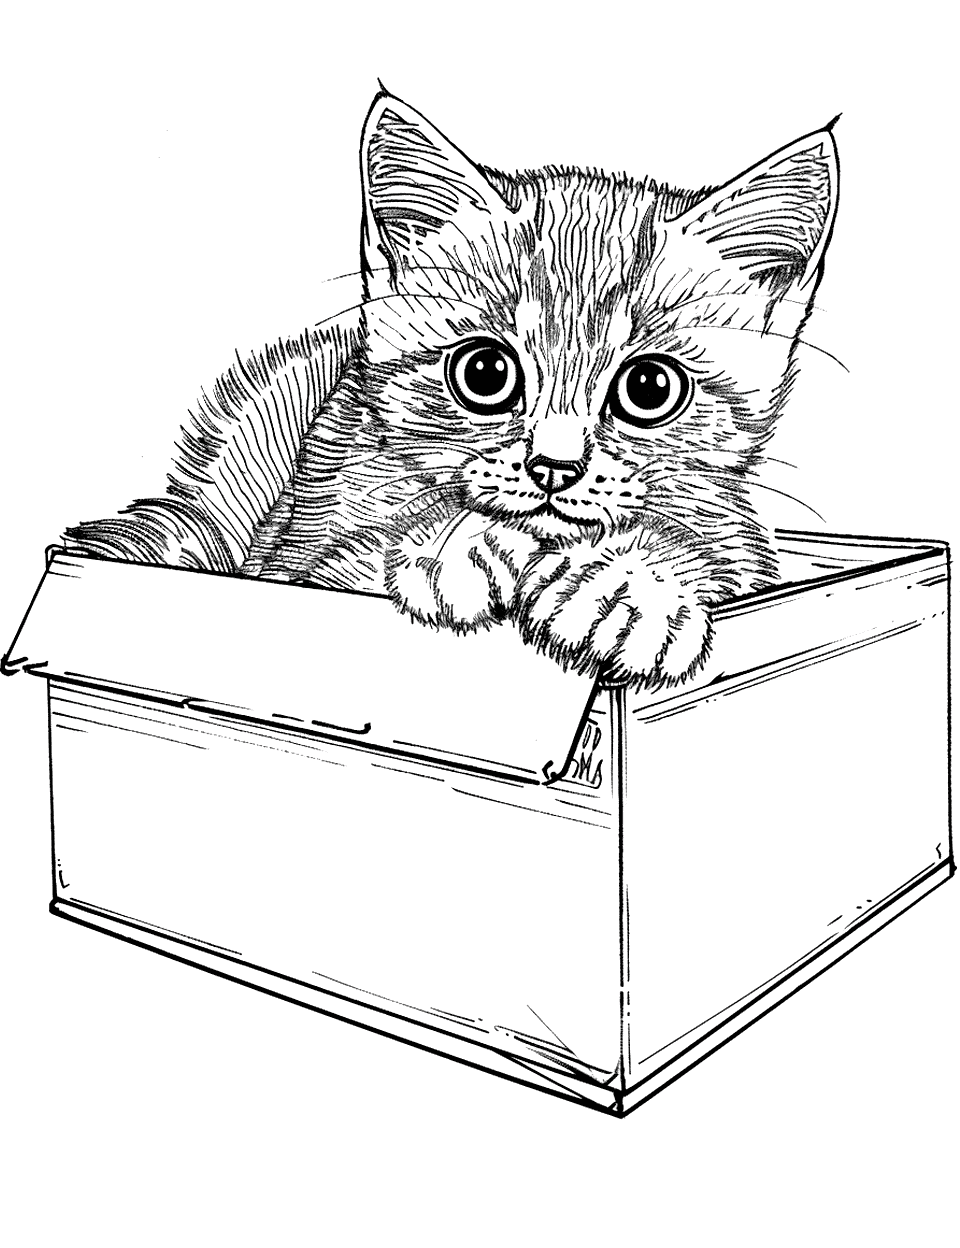 Playful Kitten in a Shoe Box Coloring Page - A playful kitten peeking out of a shoe box.